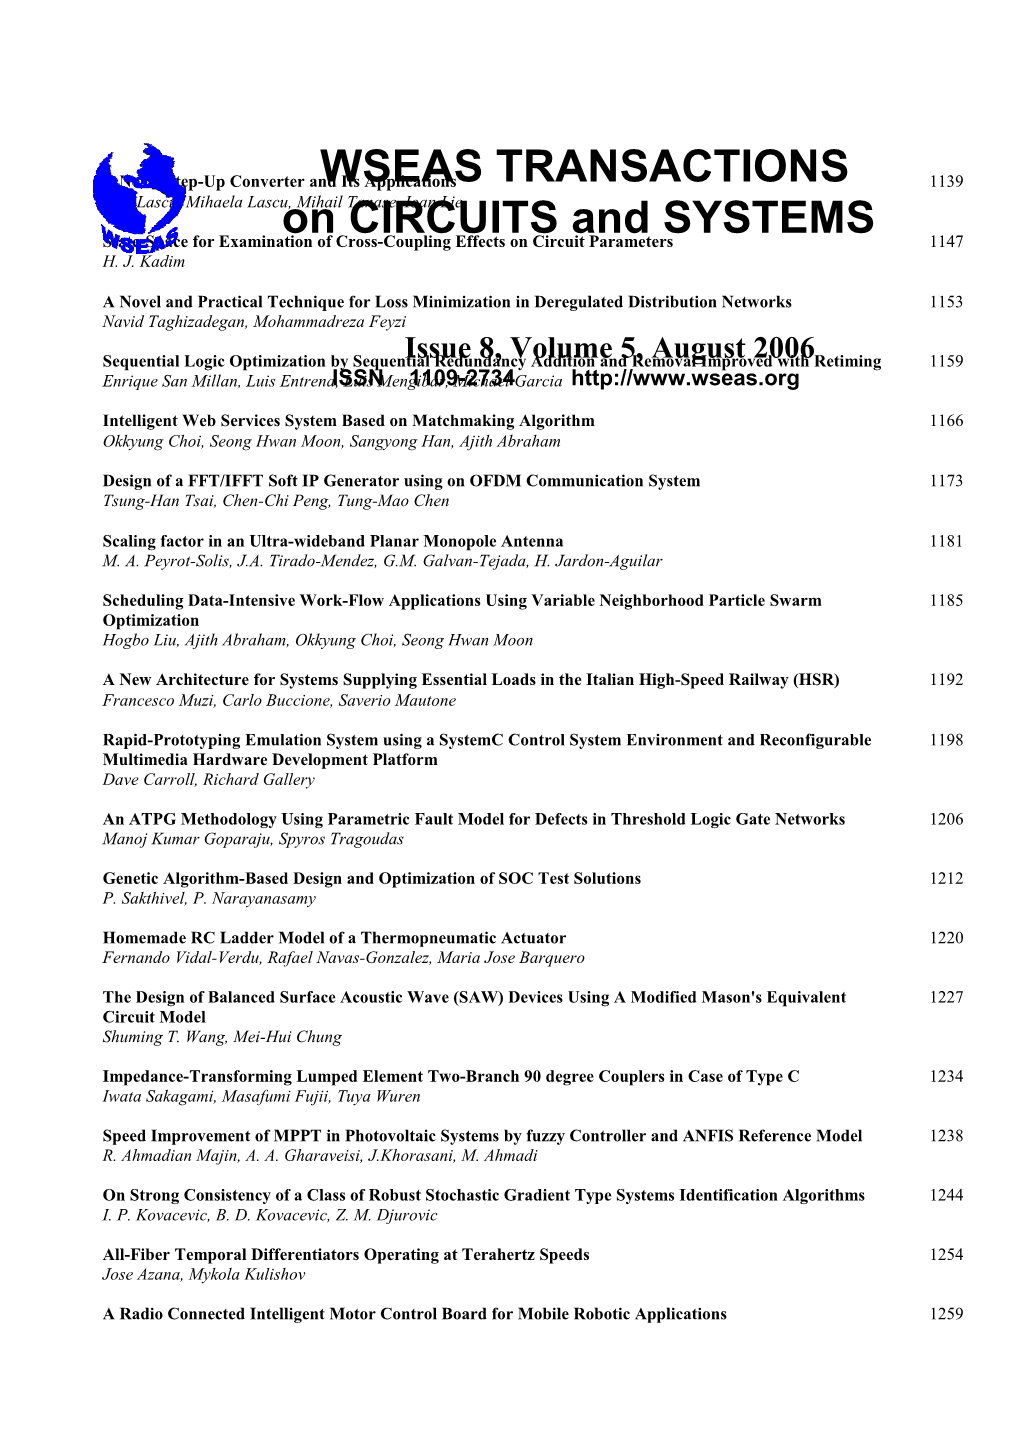 WSEAS Trans. on CIRCUITS and SYSTEMS, August 2006